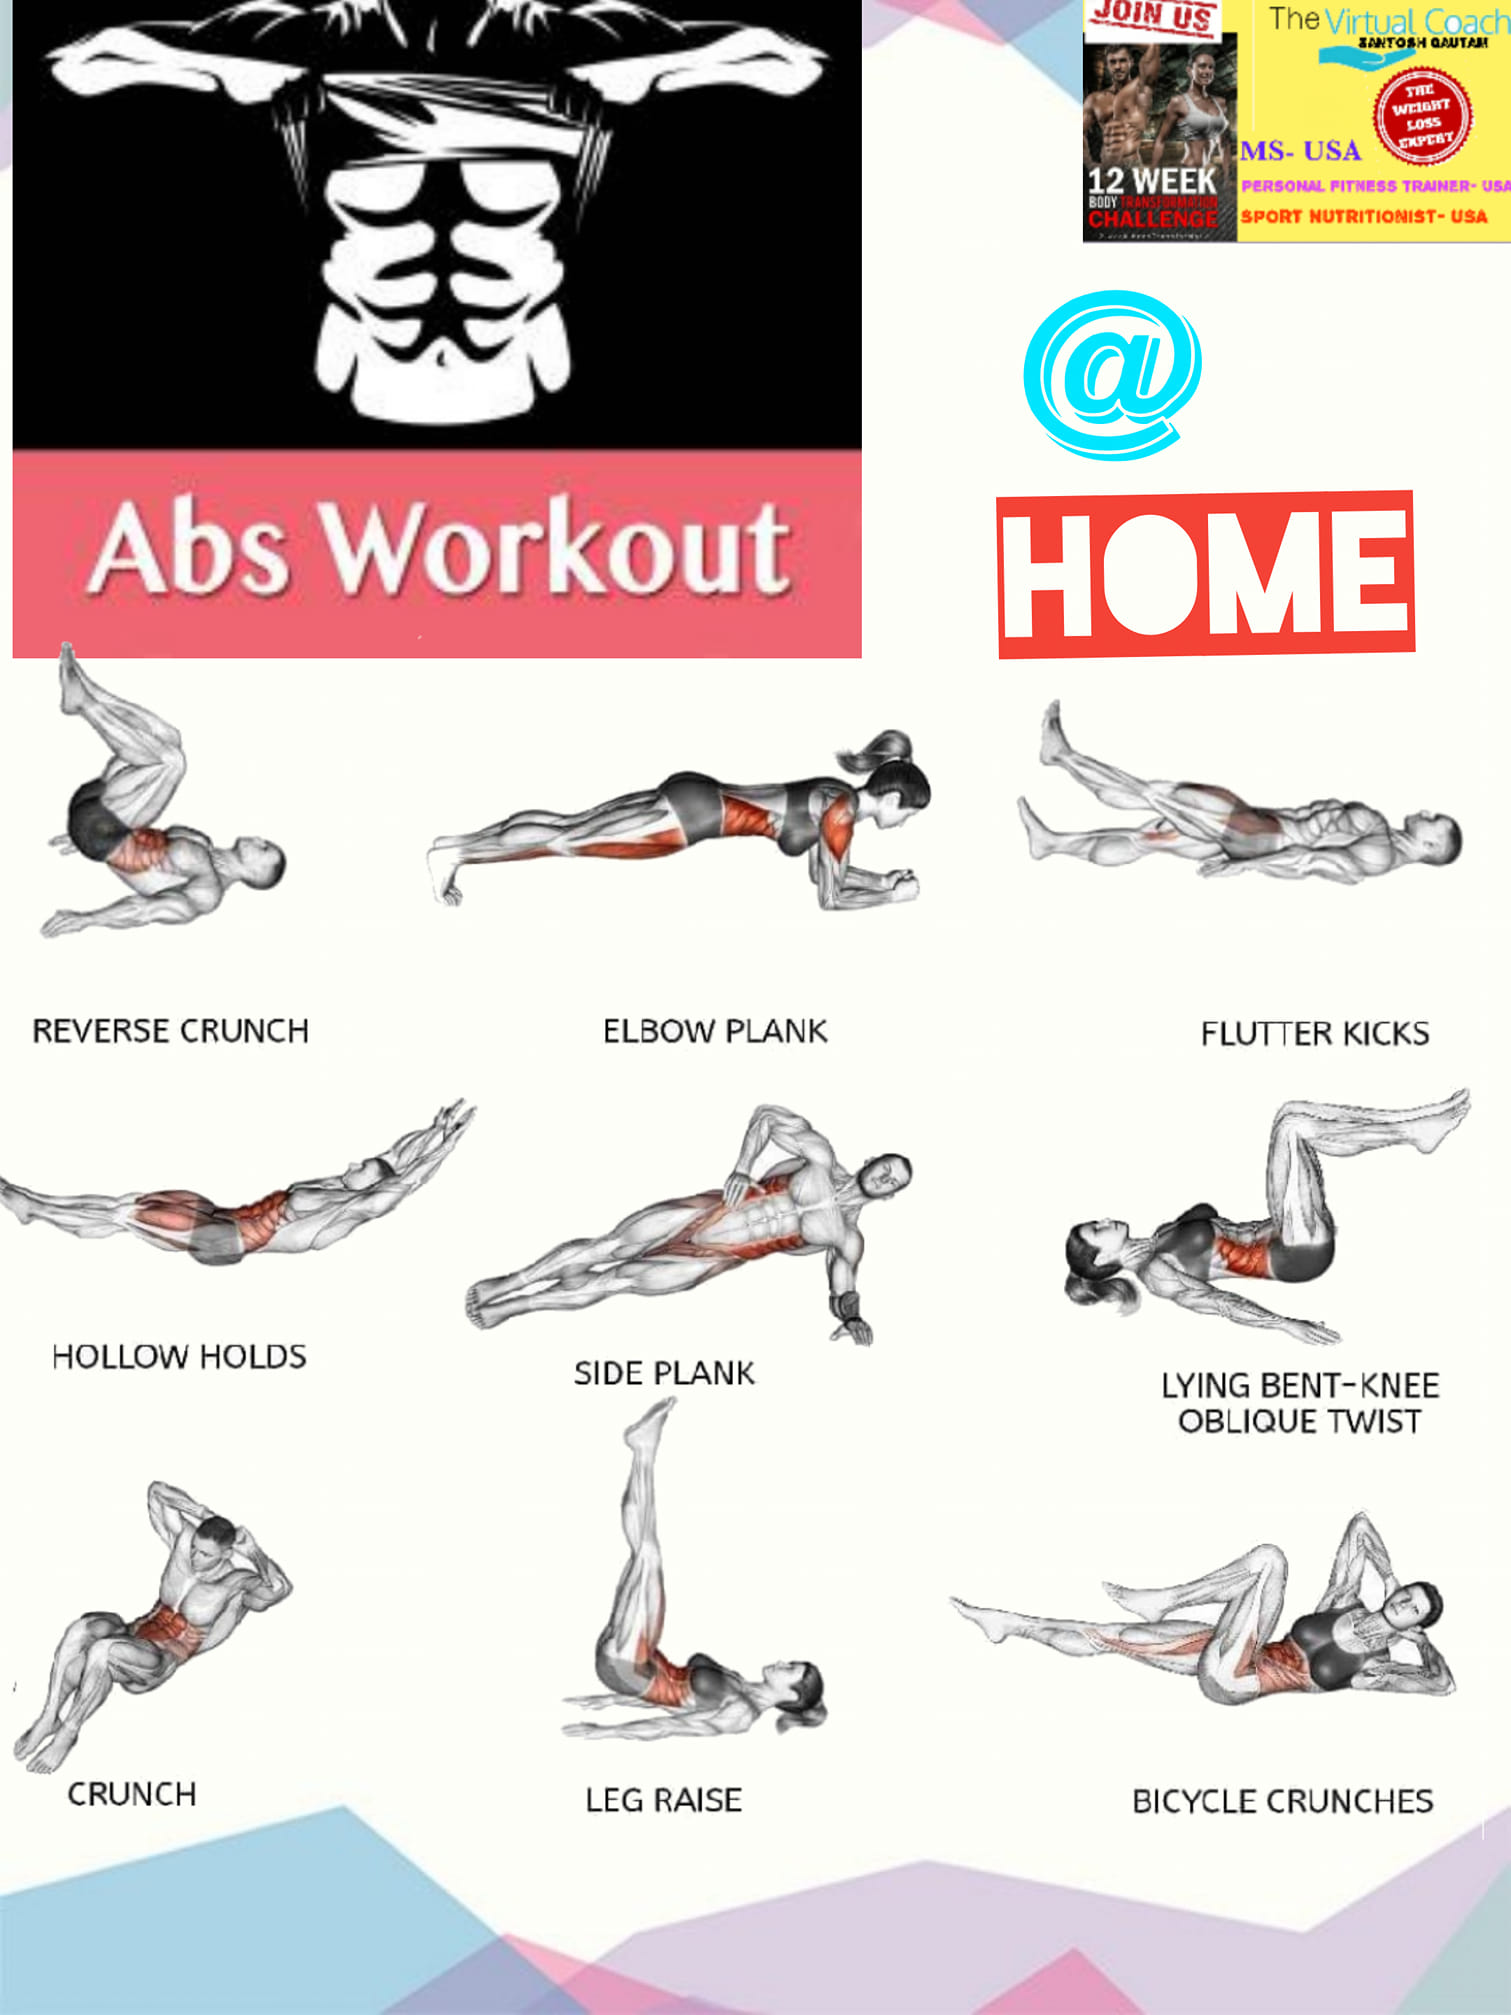 #ABS Home ABS WORKOUT !!!!